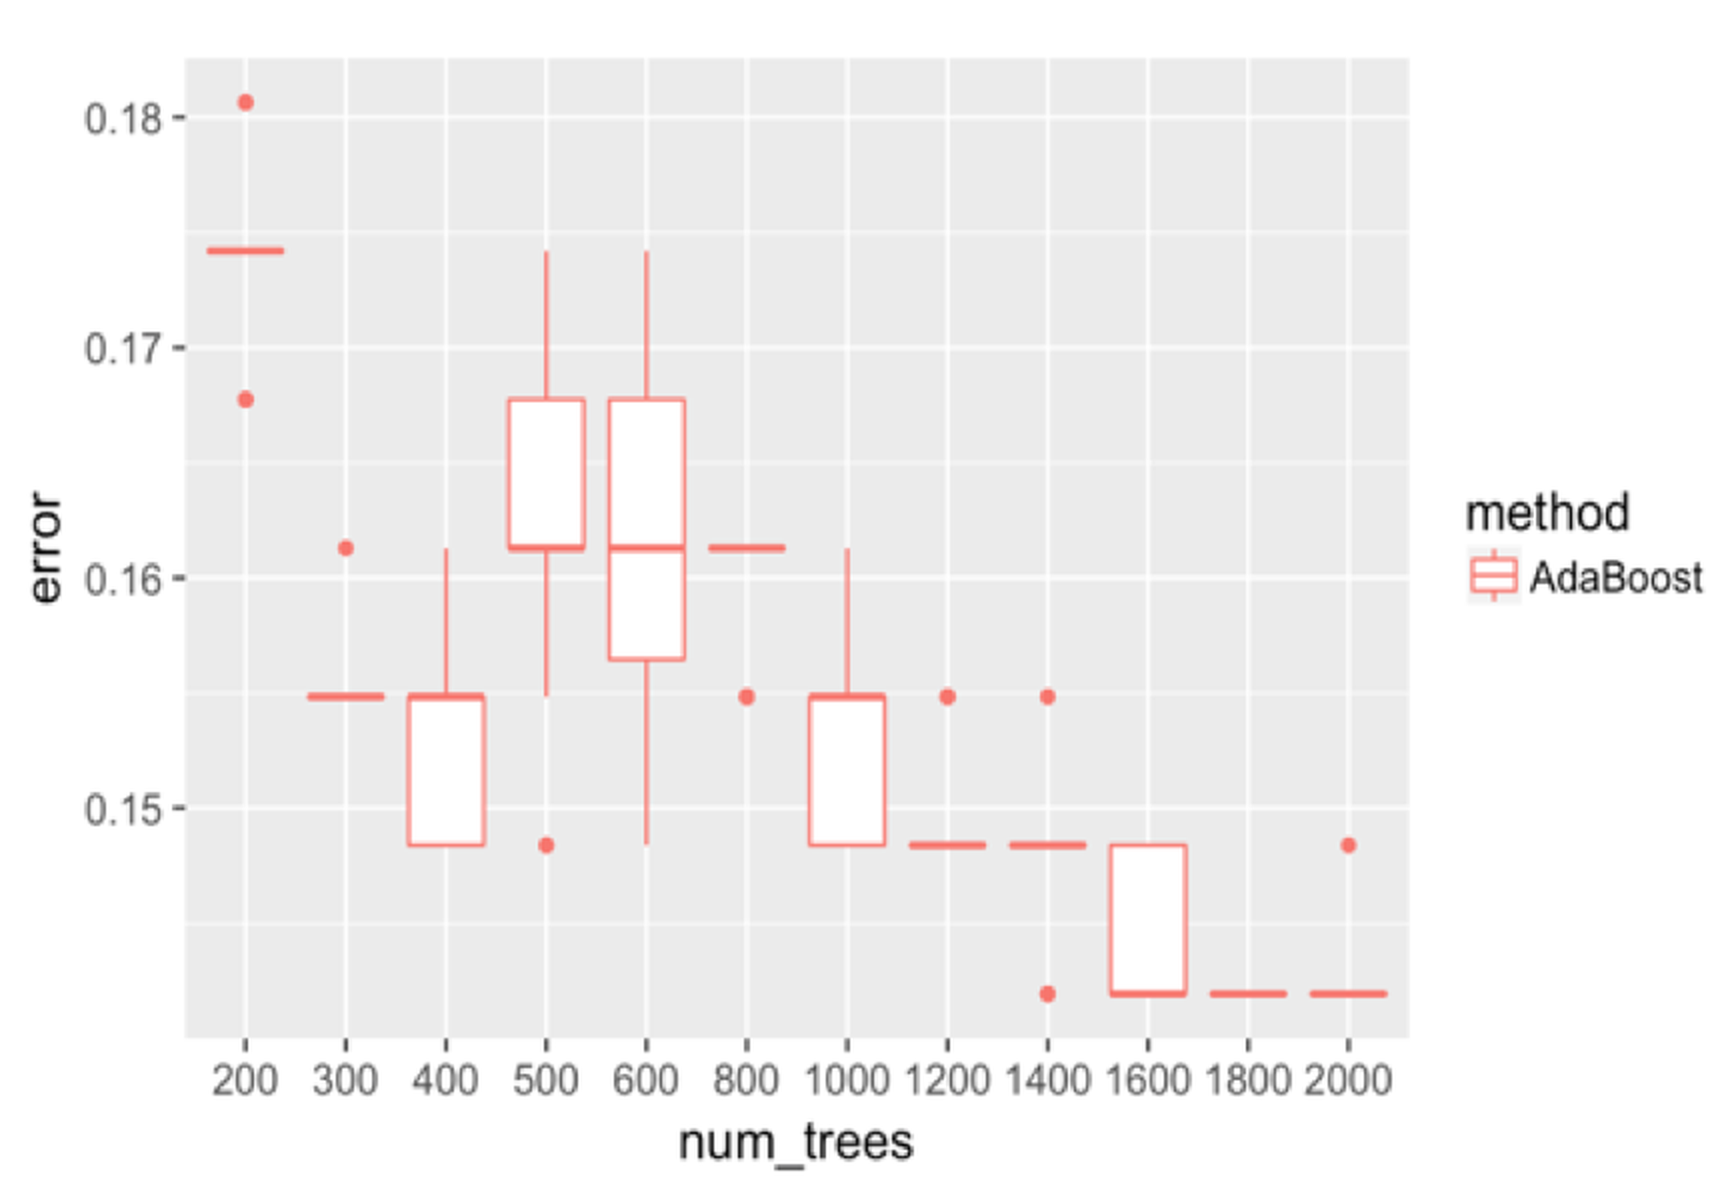  Boxplots of the classification error rates for AdaBoost with a different number of trees